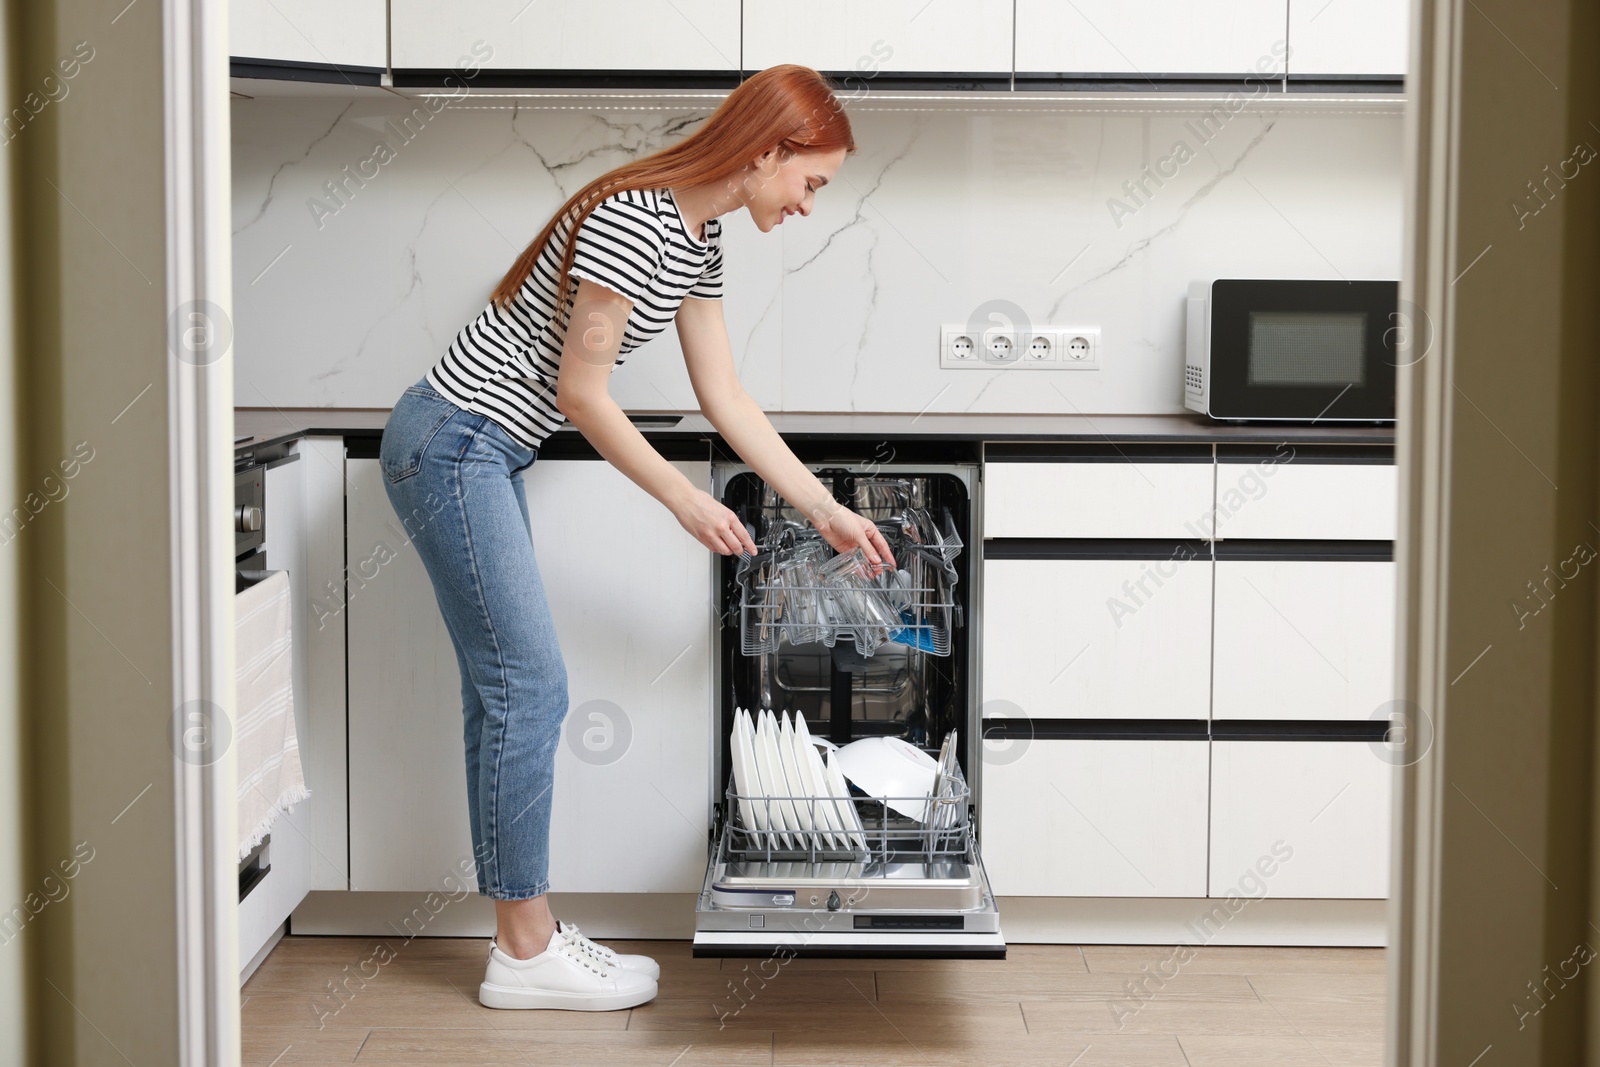 Photo of Smiling woman loading dishwasher with glasses and plates in kitchen